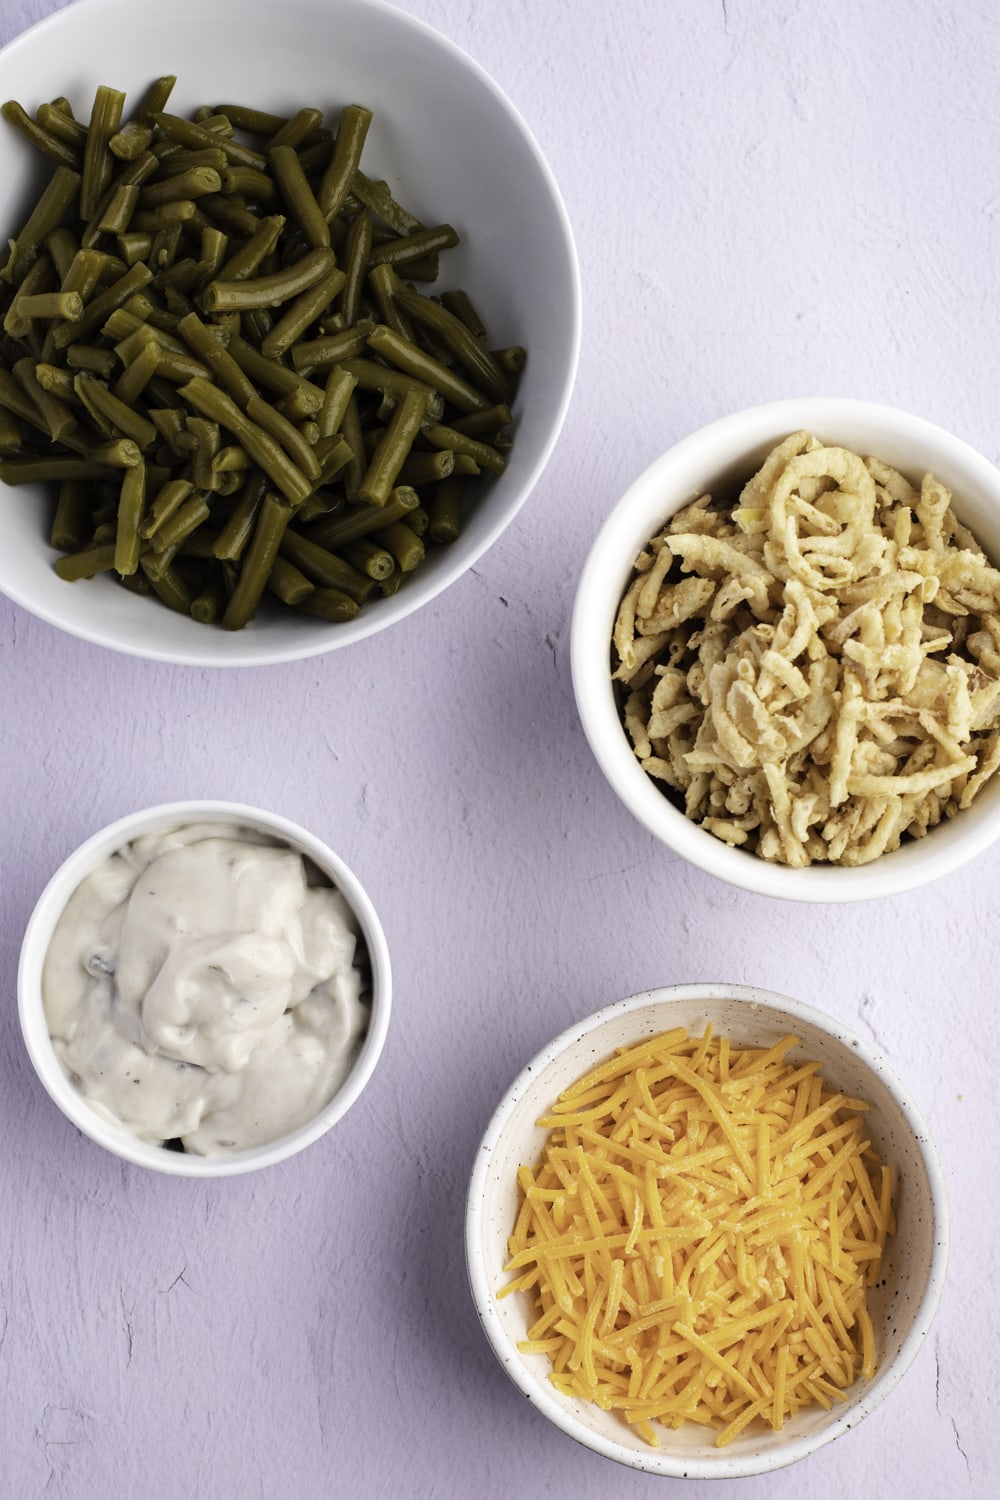 French's Green Bean Casserole Ingredients